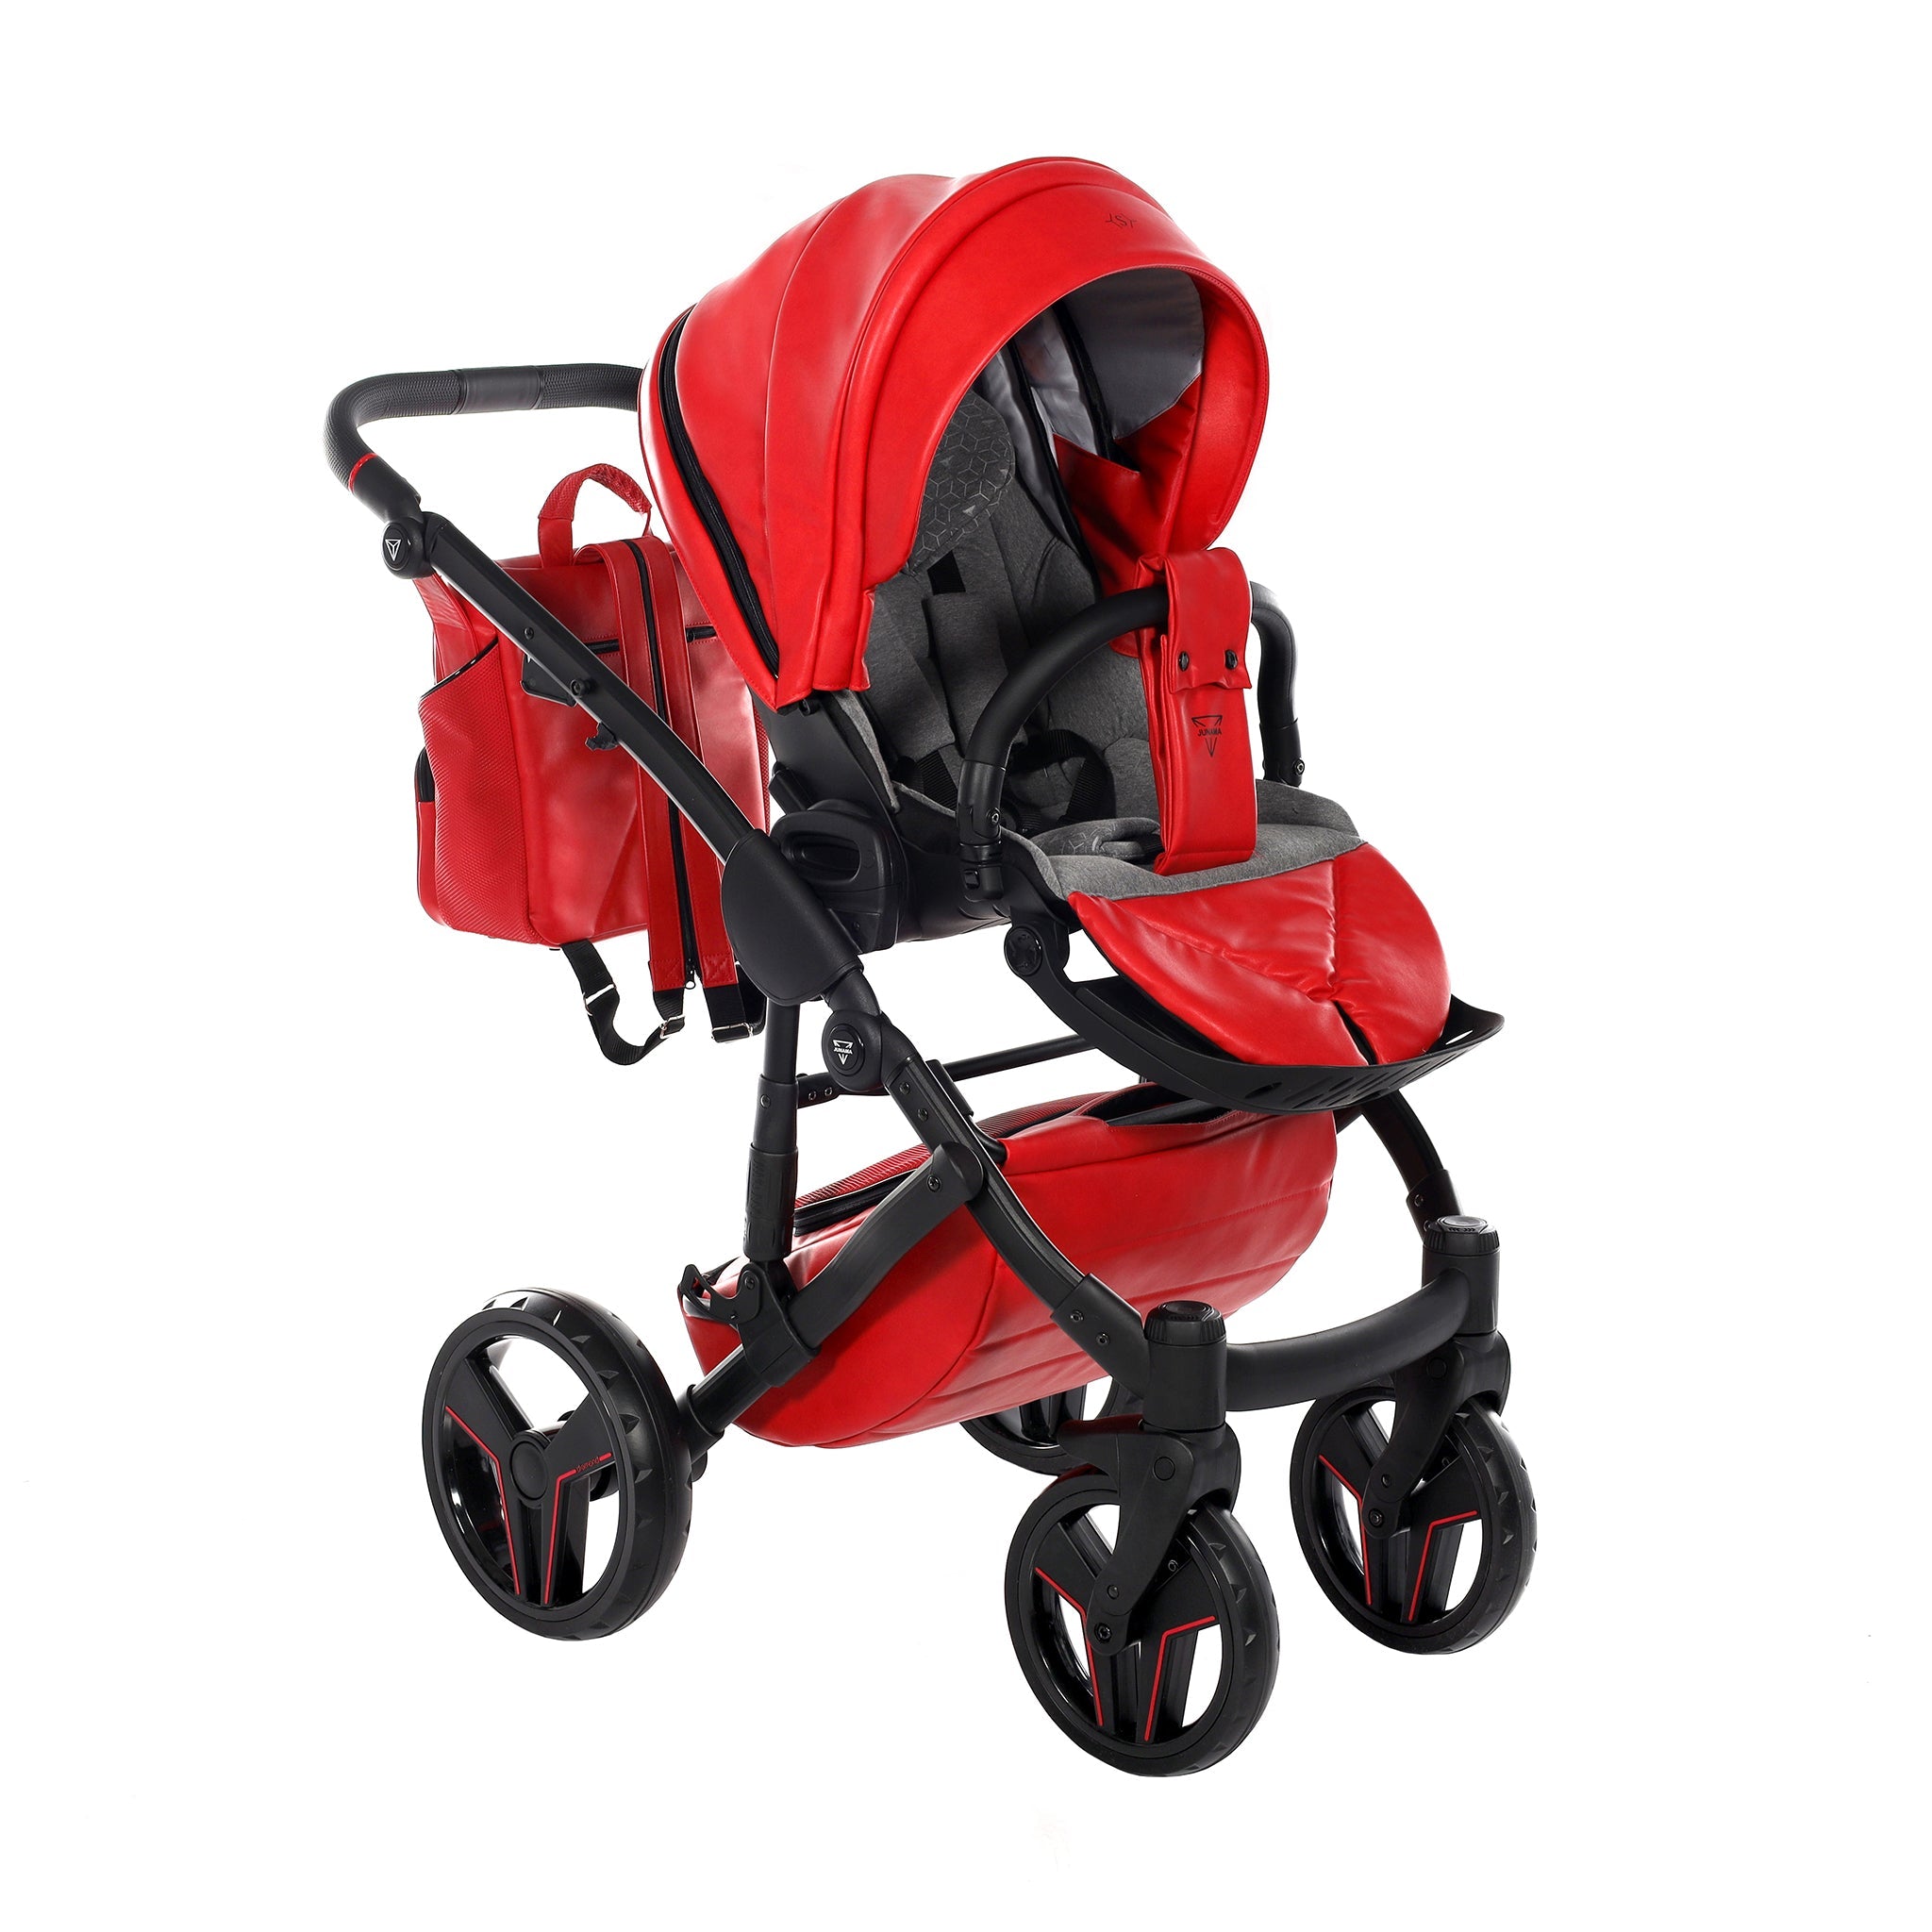 Junama S Class, baby prams or stroller 2 in 1 - Red and Black, Code number: JUNSC08